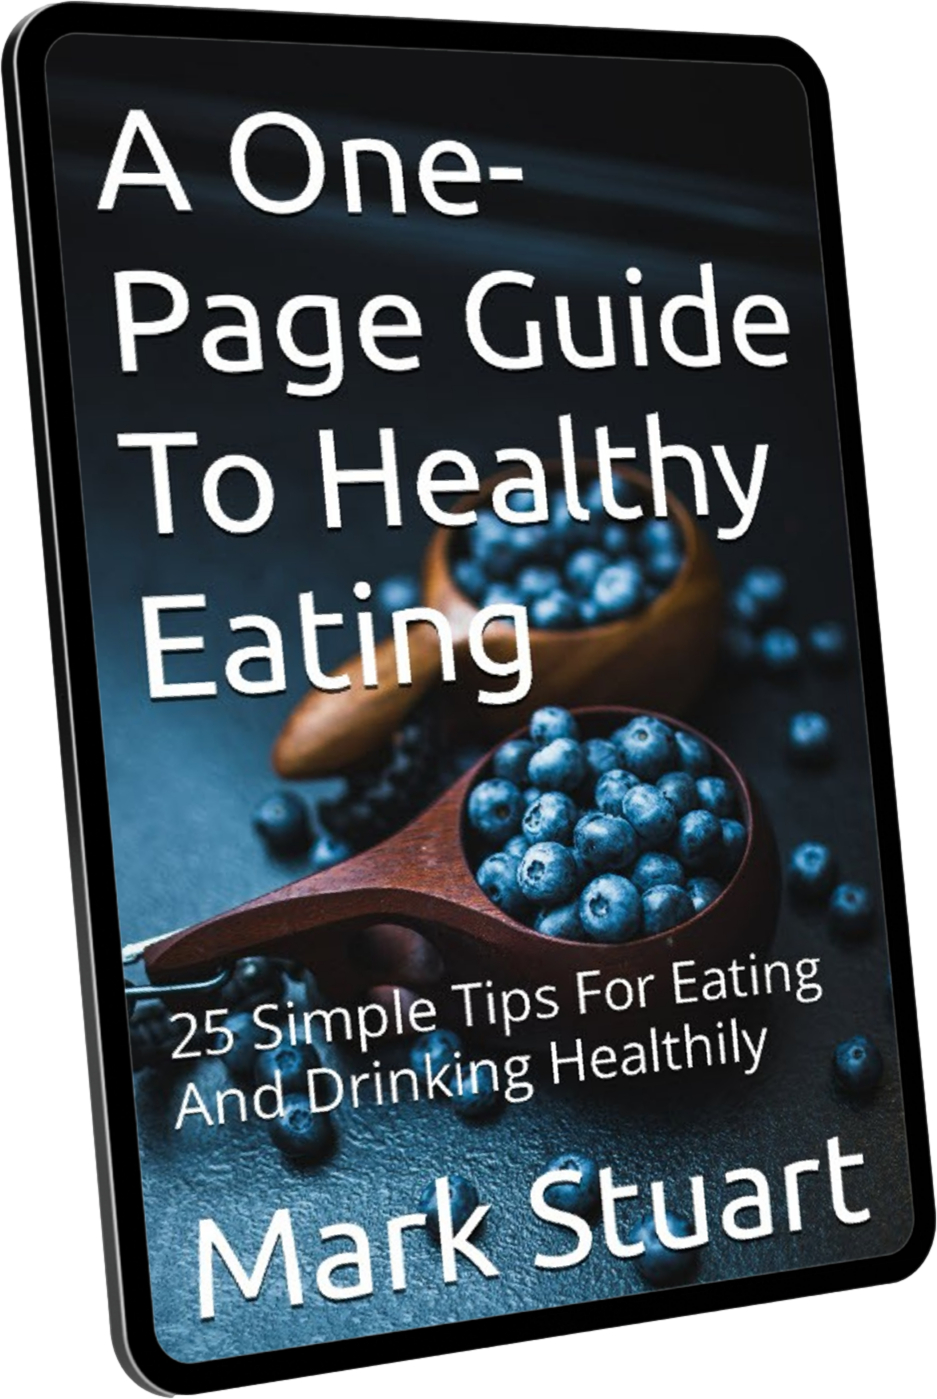 A One-Page Guide To Healthy Eating by Mark Stuart